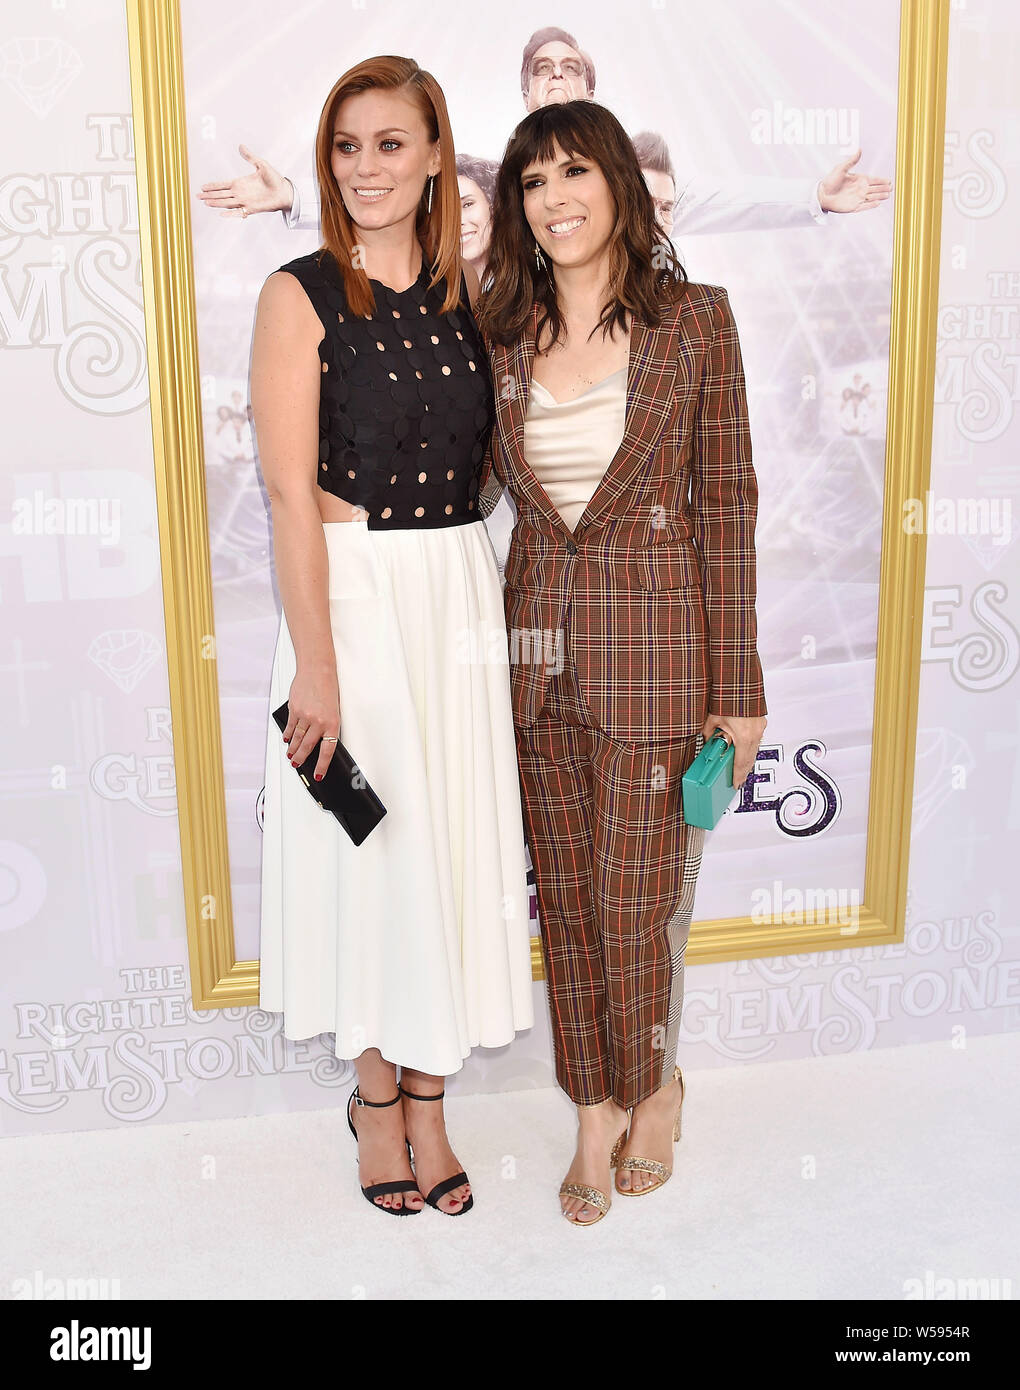 HOLLYWOOD, CA - JULY 25: Cassidy Freeman (L) and Edi Patterson attend the Los Angeles Premiere Of New HBO Series 'The Righteous Gemstones' at Paramount Studios on July 25, 2019 in Hollywood, California. Stock Photo